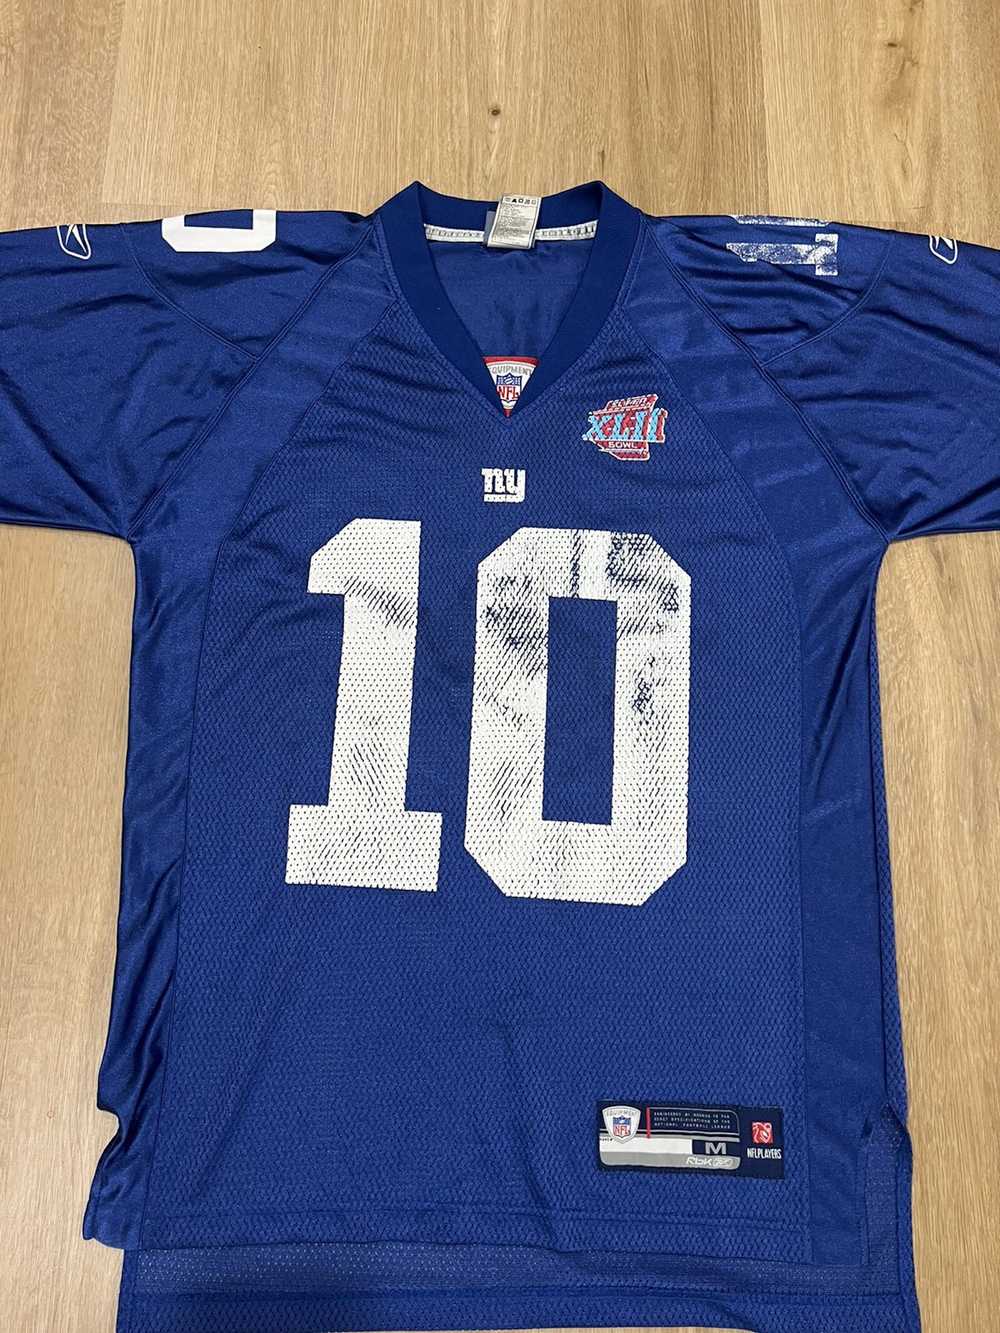 Youth Eli Manning #10 New York Giants Jersey 